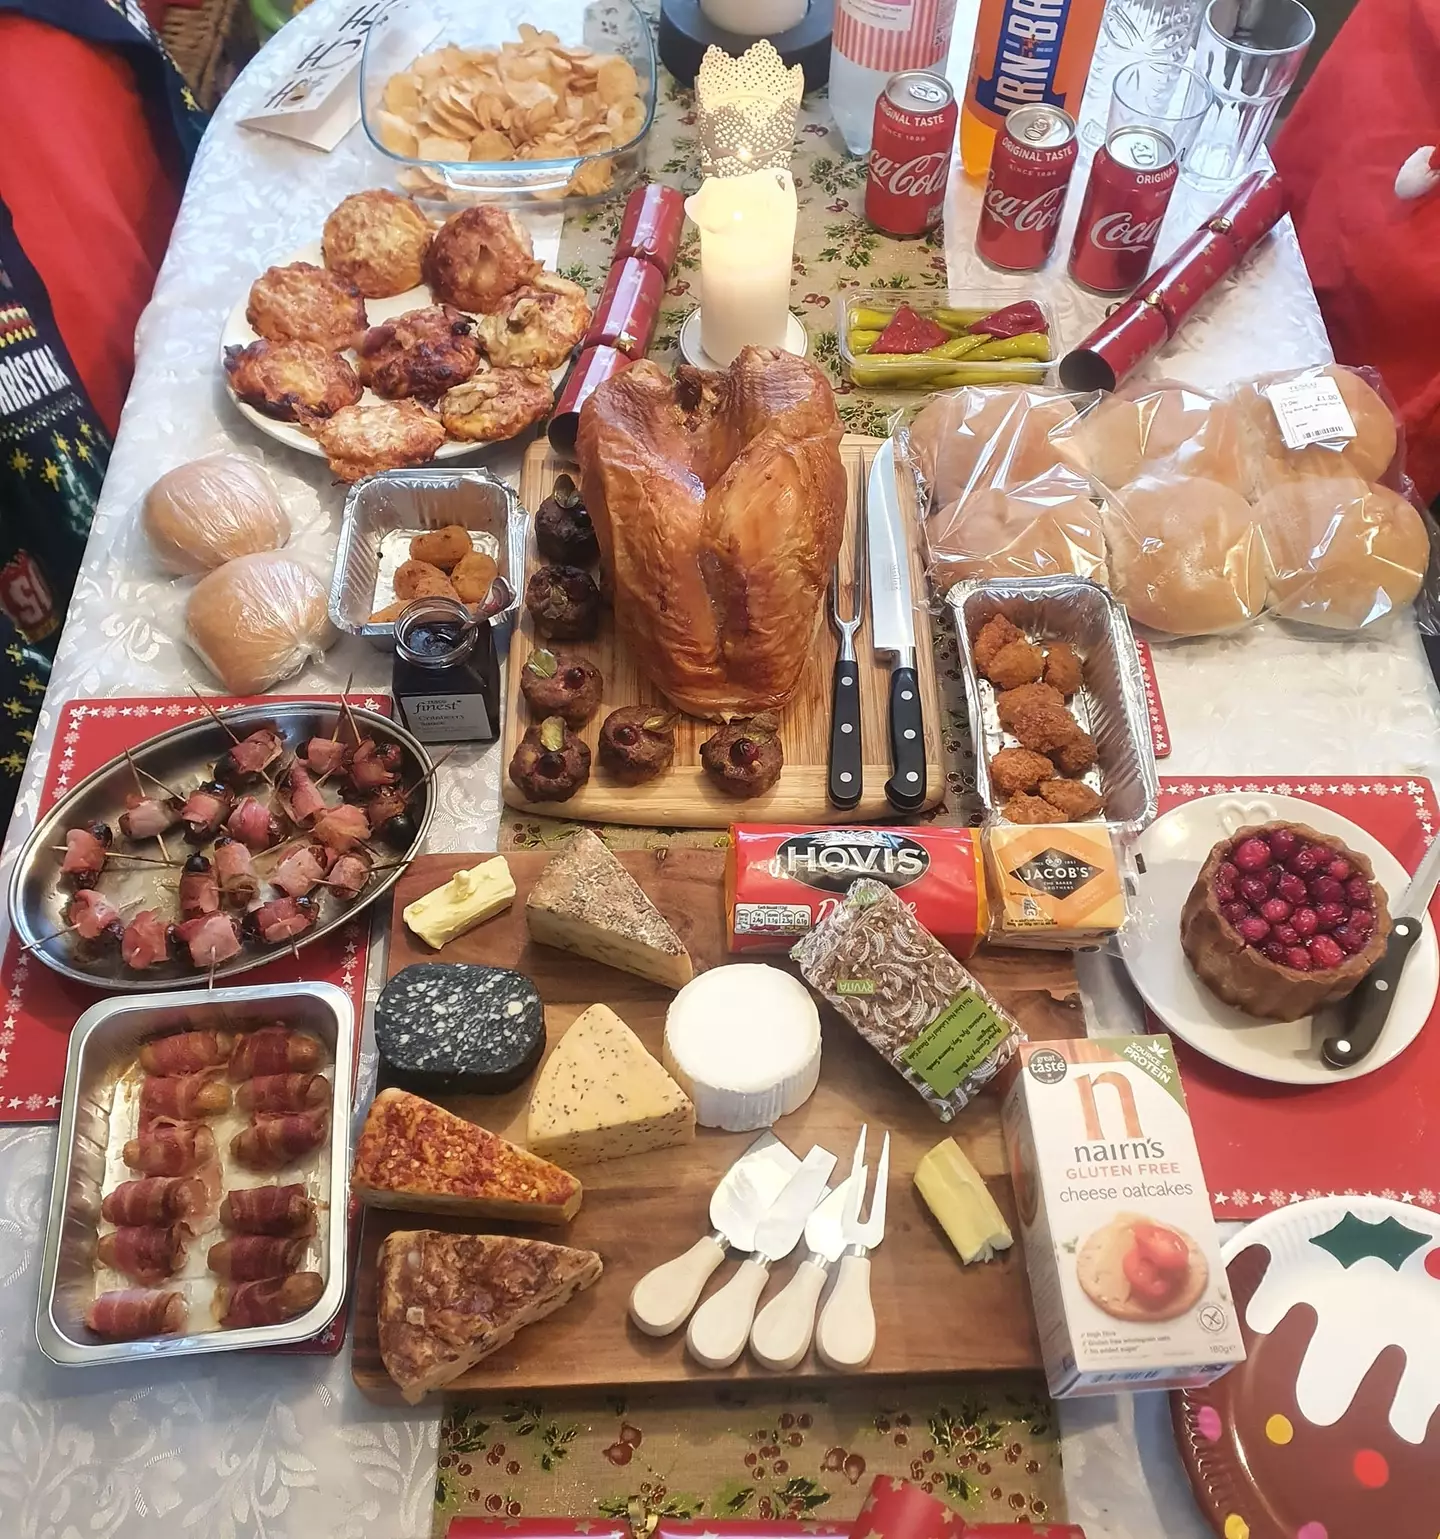 Amy shared a picture of her Christmas dinner from last year (